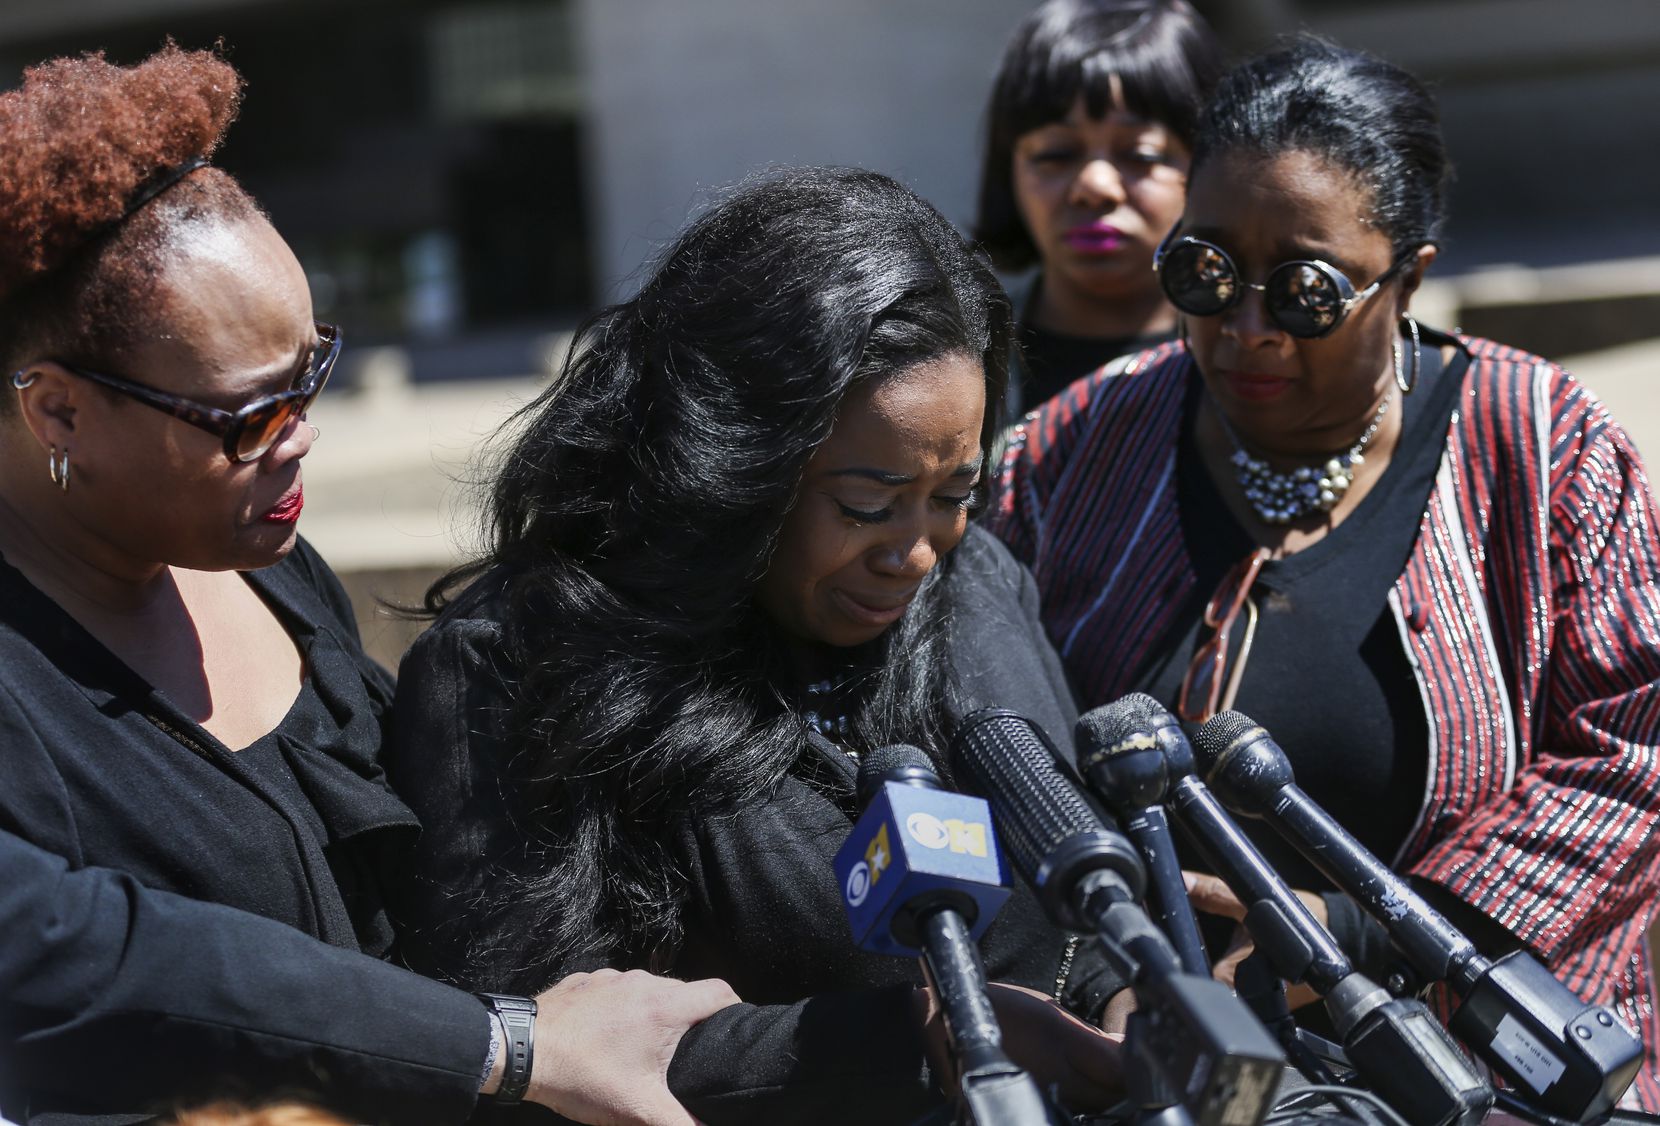 Supporters surround Keyaira Saunders as she speaks during a news conference at Dallas City Hall on April 19.